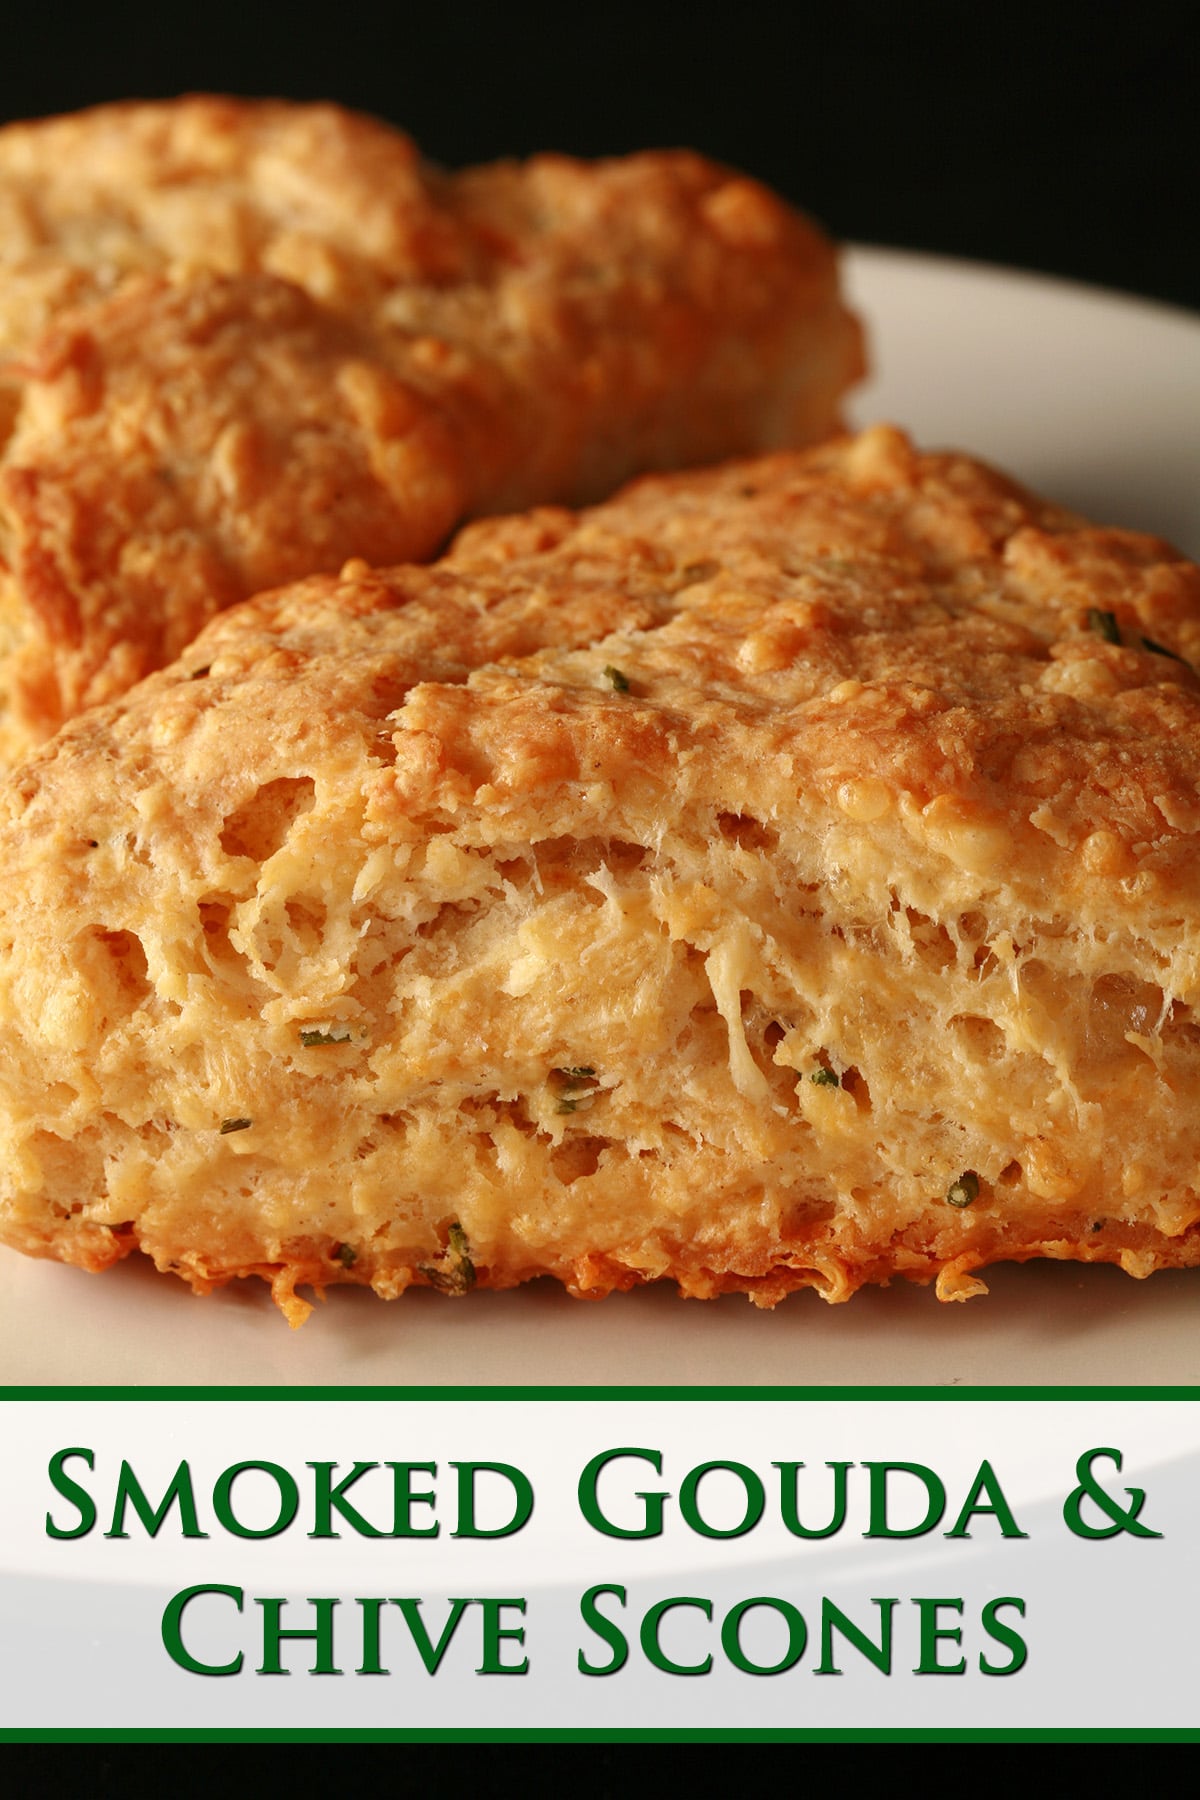 A close up view of Smoked Gouda and Chive scones on a small white plate.